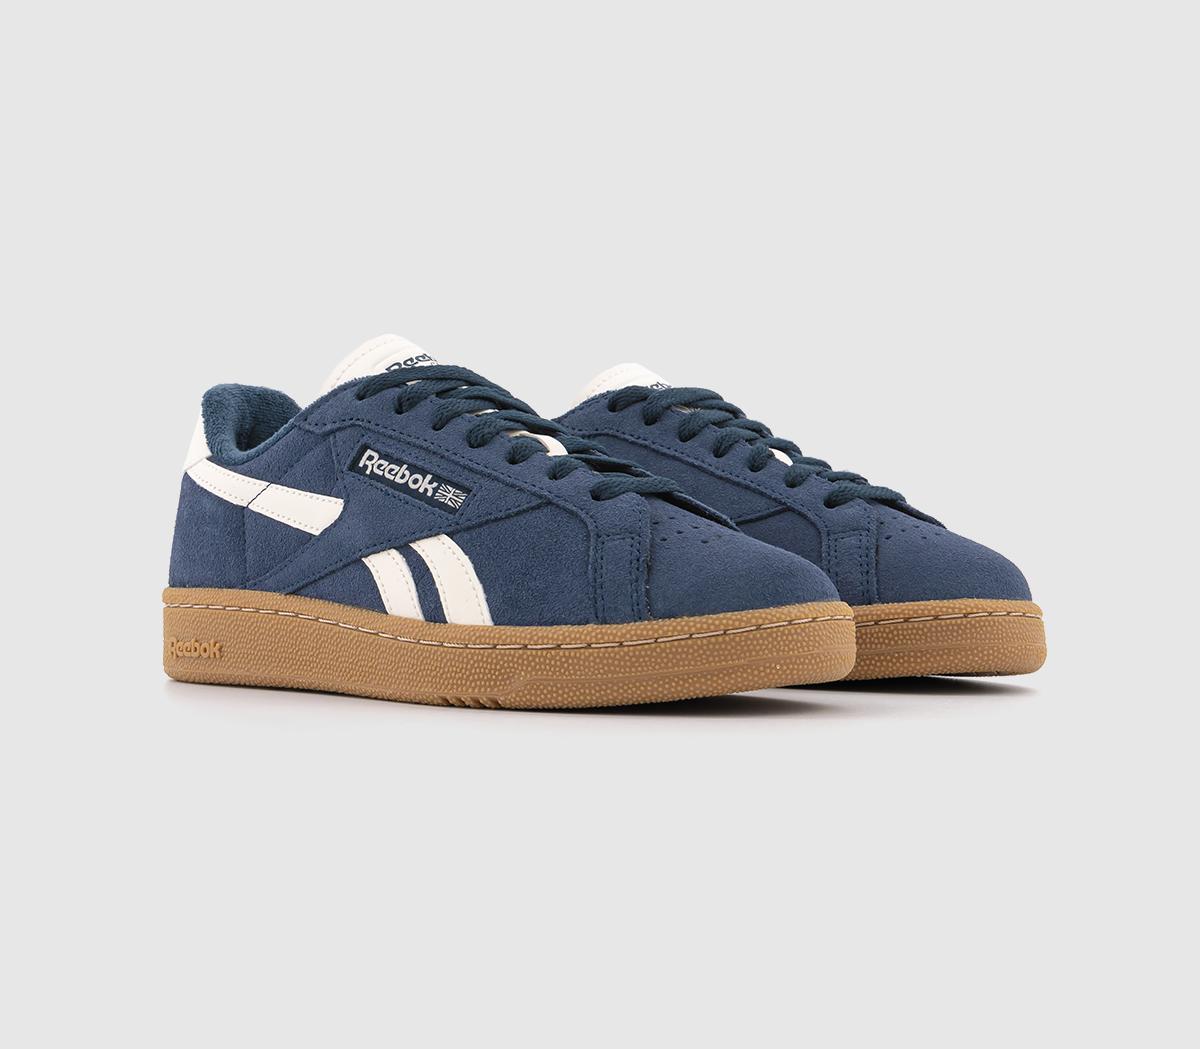 Reebok Womens Club C Grounds Trainers Vector Navy Blue, 3